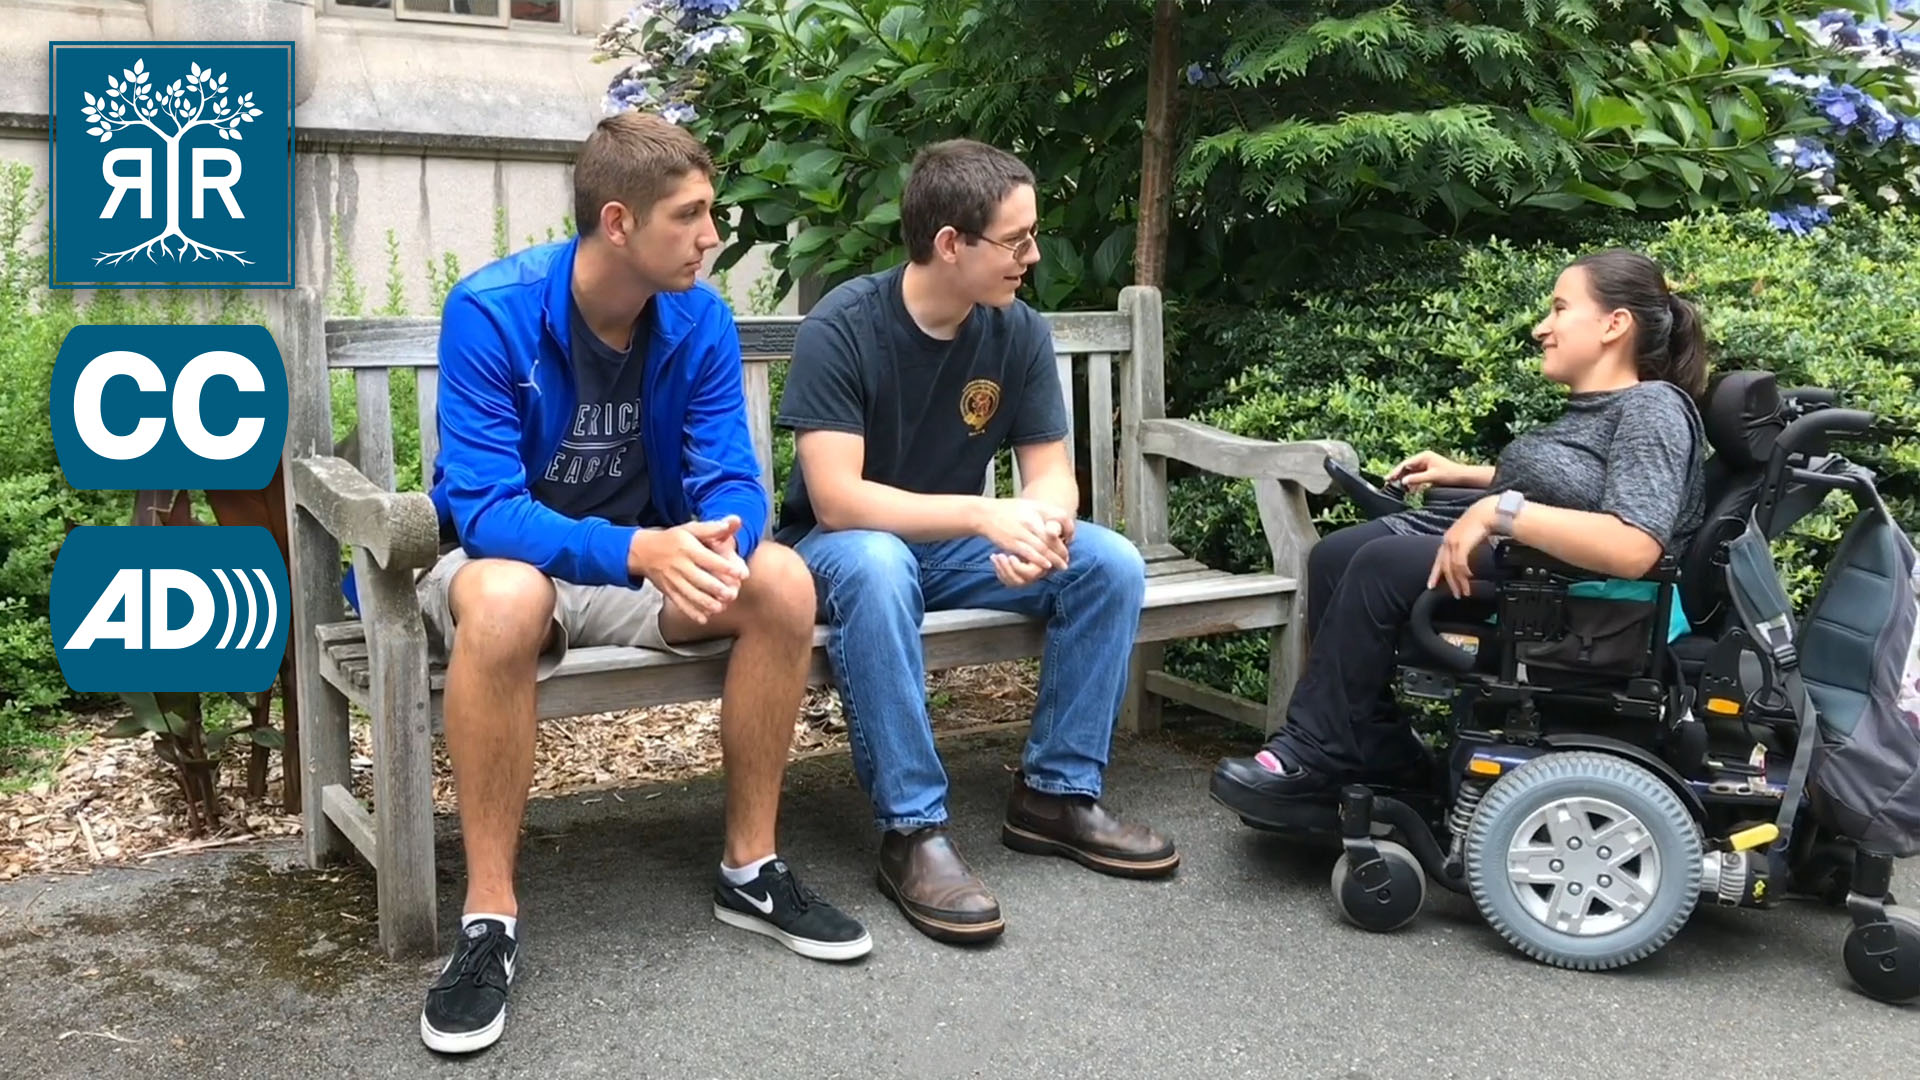 Two students face another who uses a power chair.